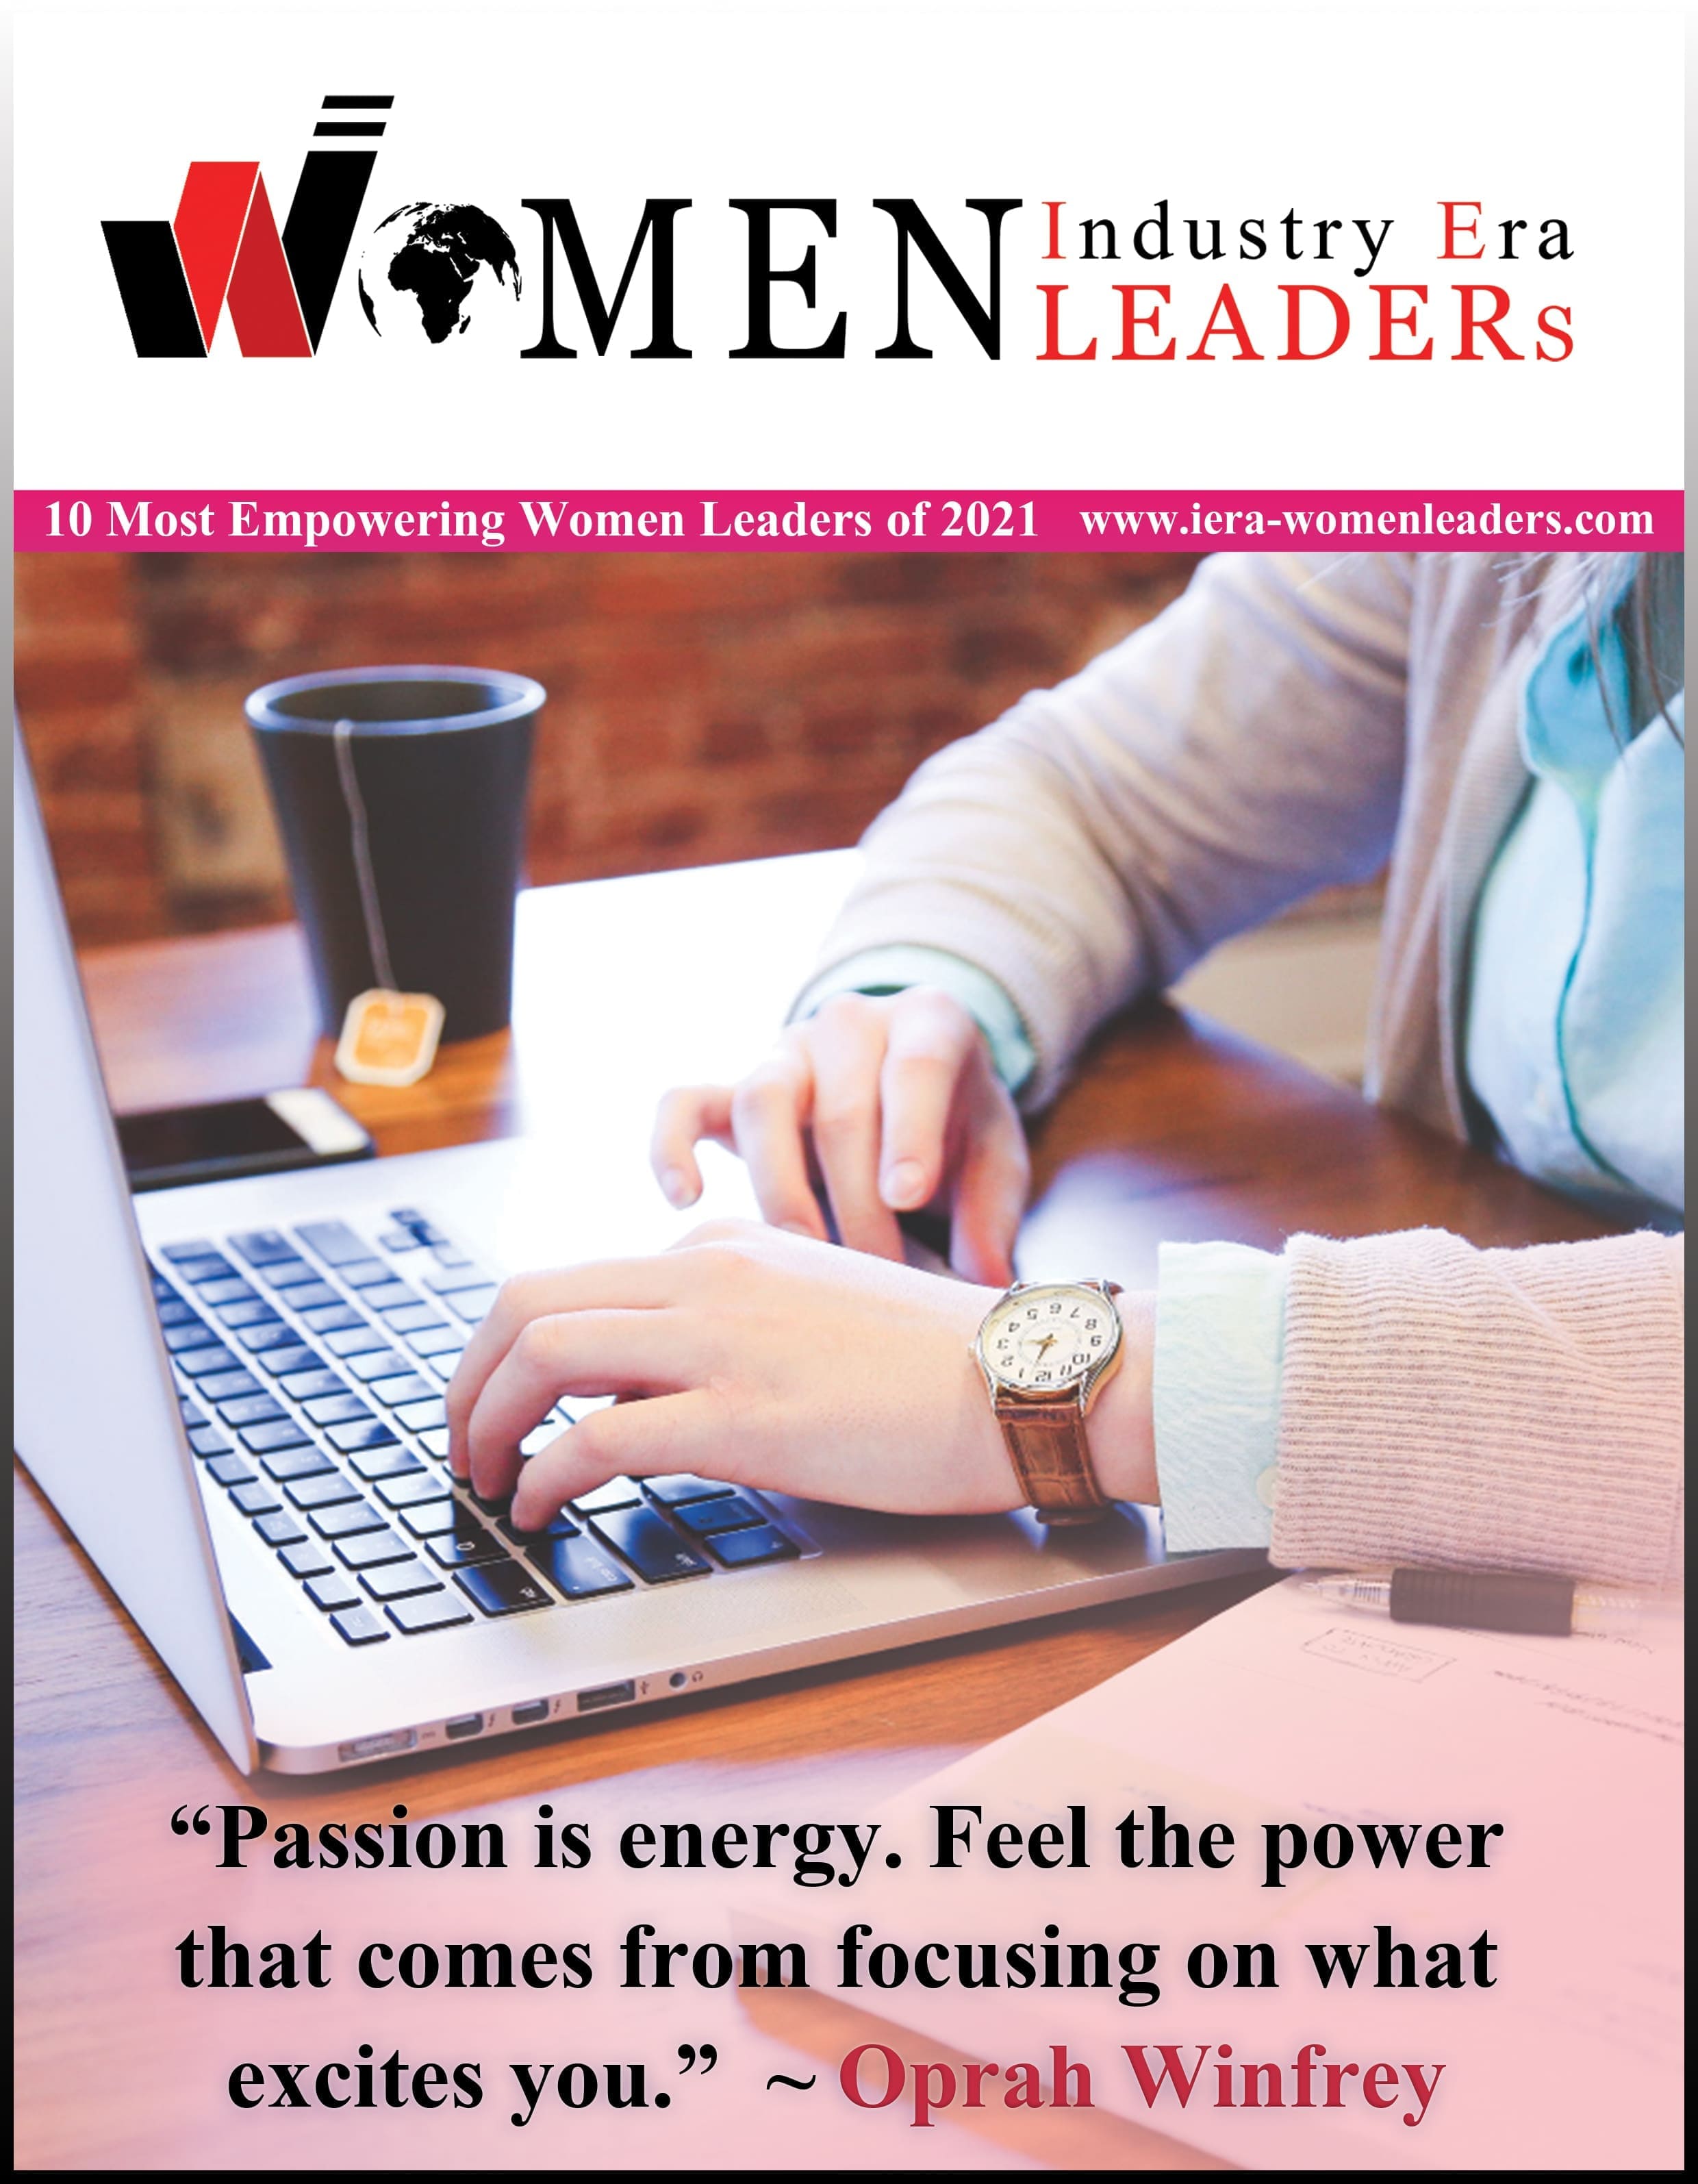 10 Most Empowering Women Leaders of 2021 Magazine